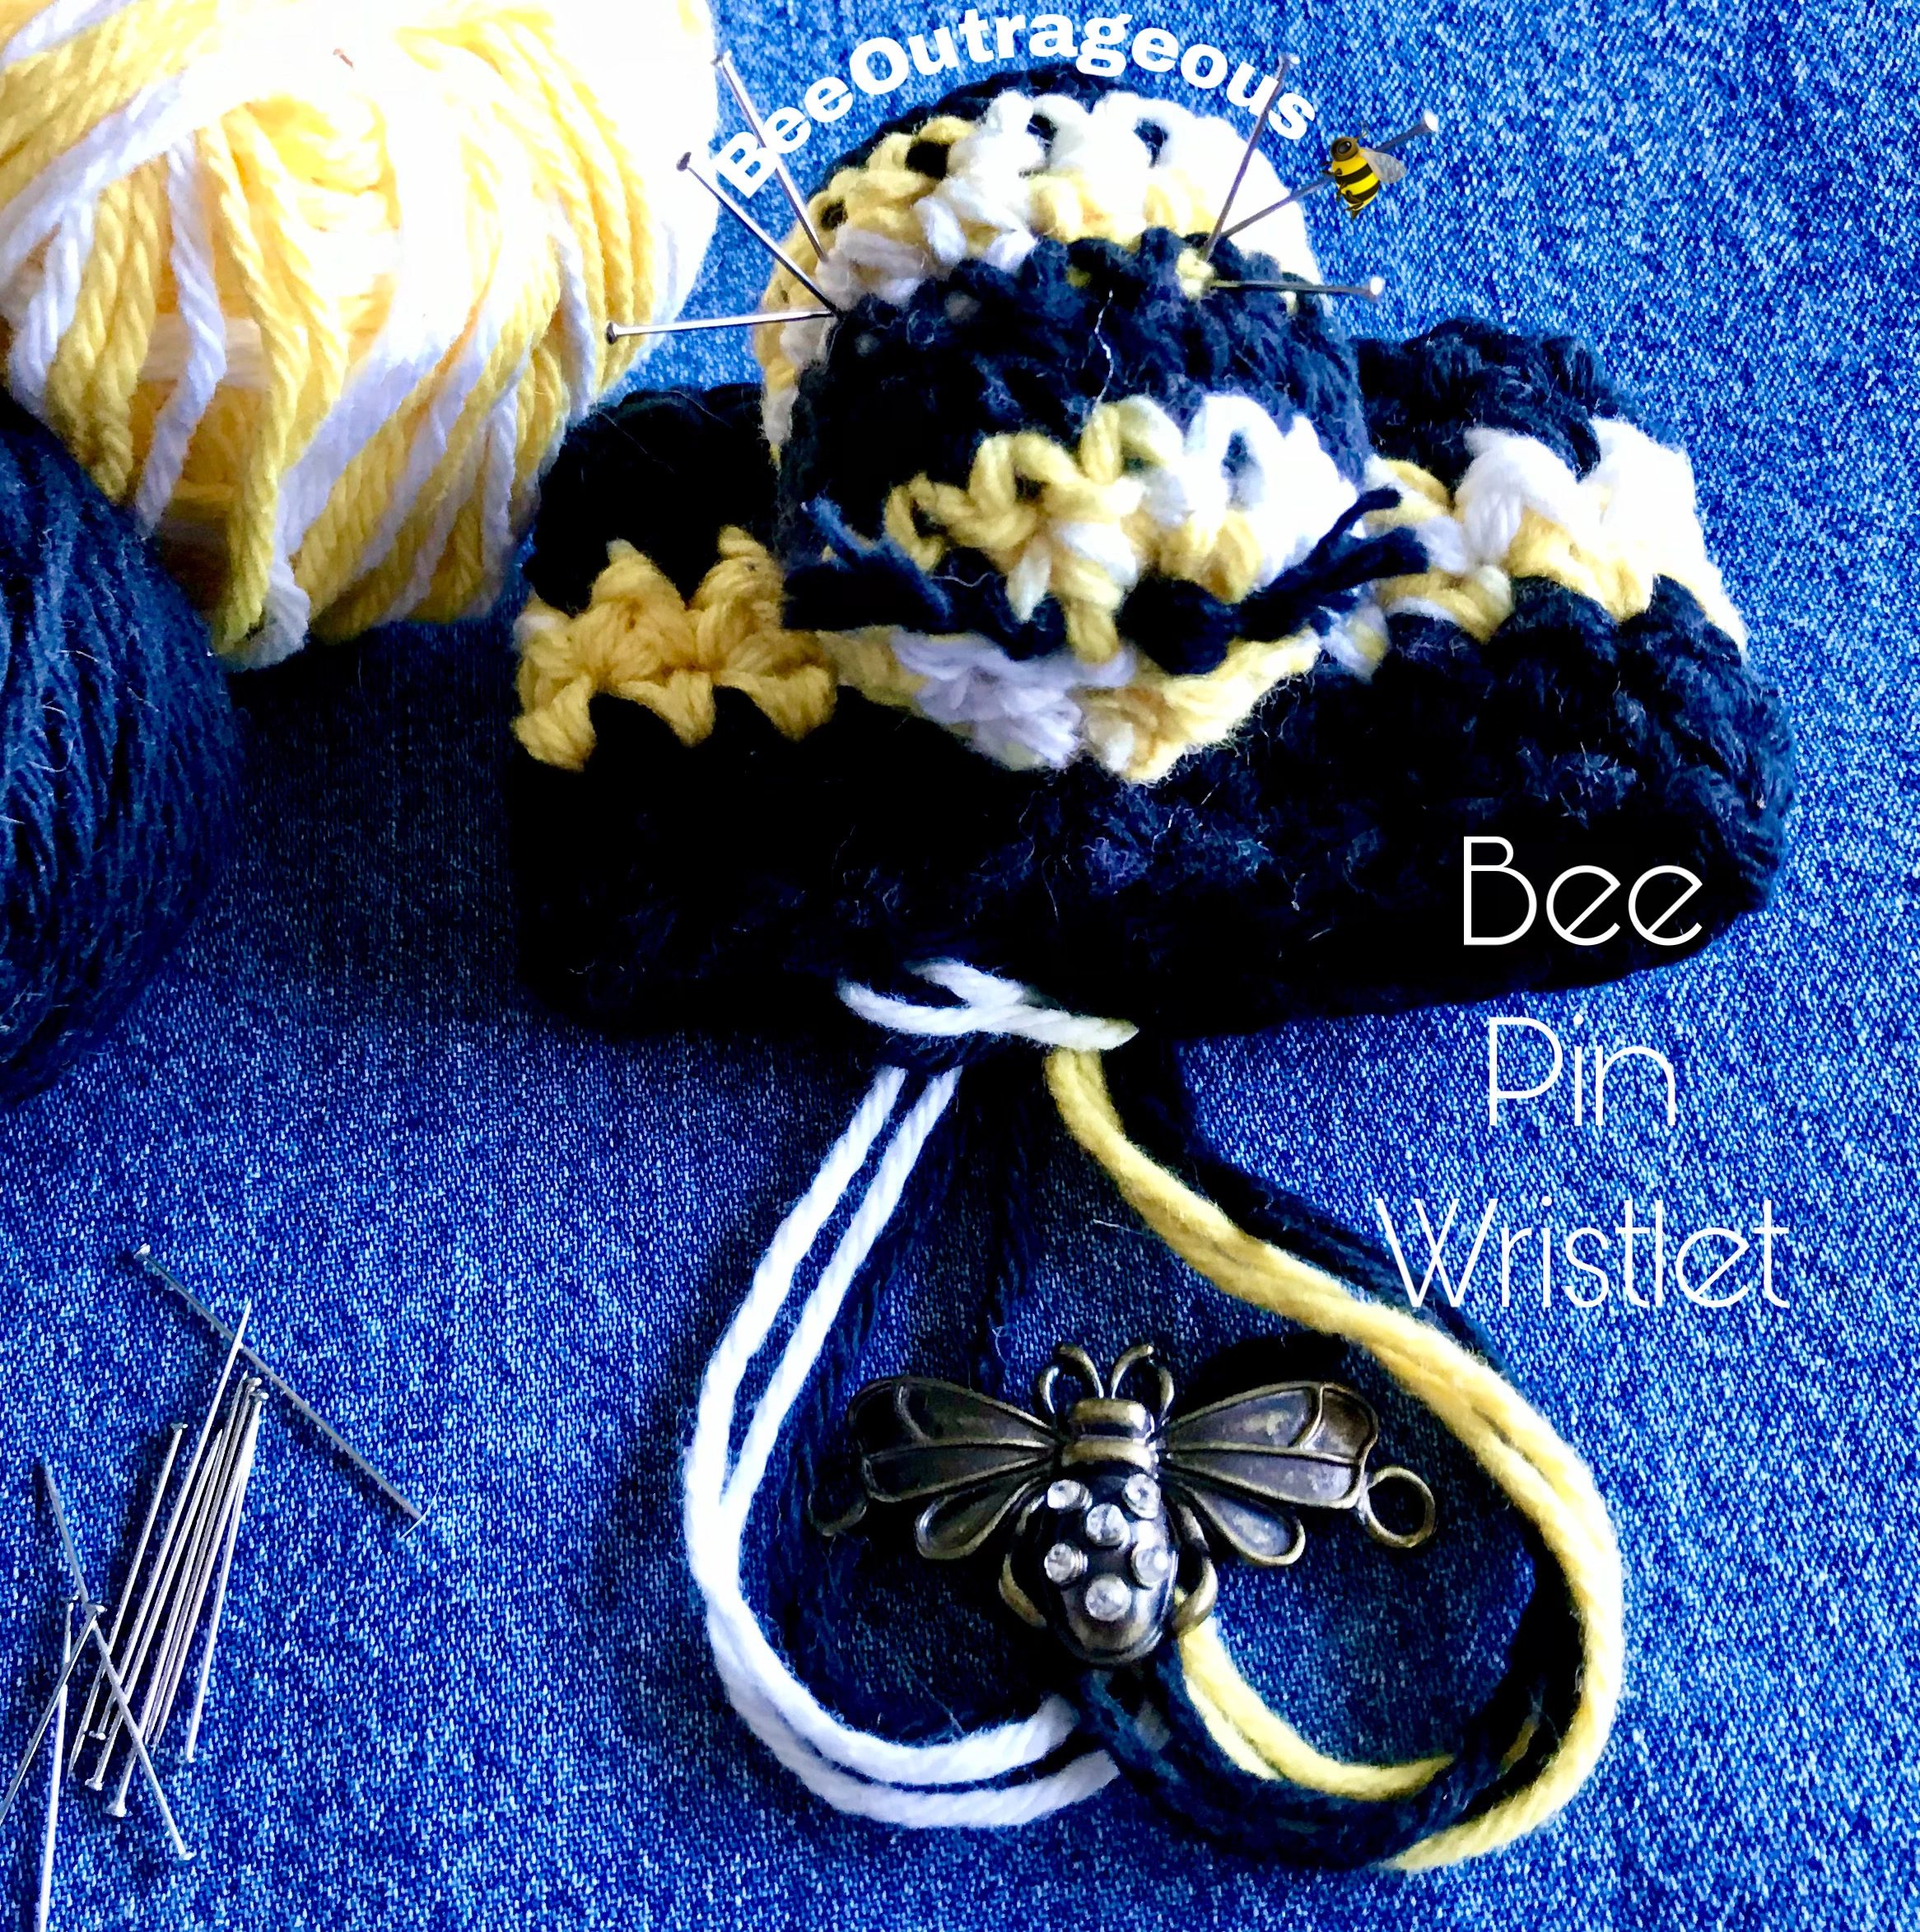 Crocheted Wristlet with a bee shaped trinket